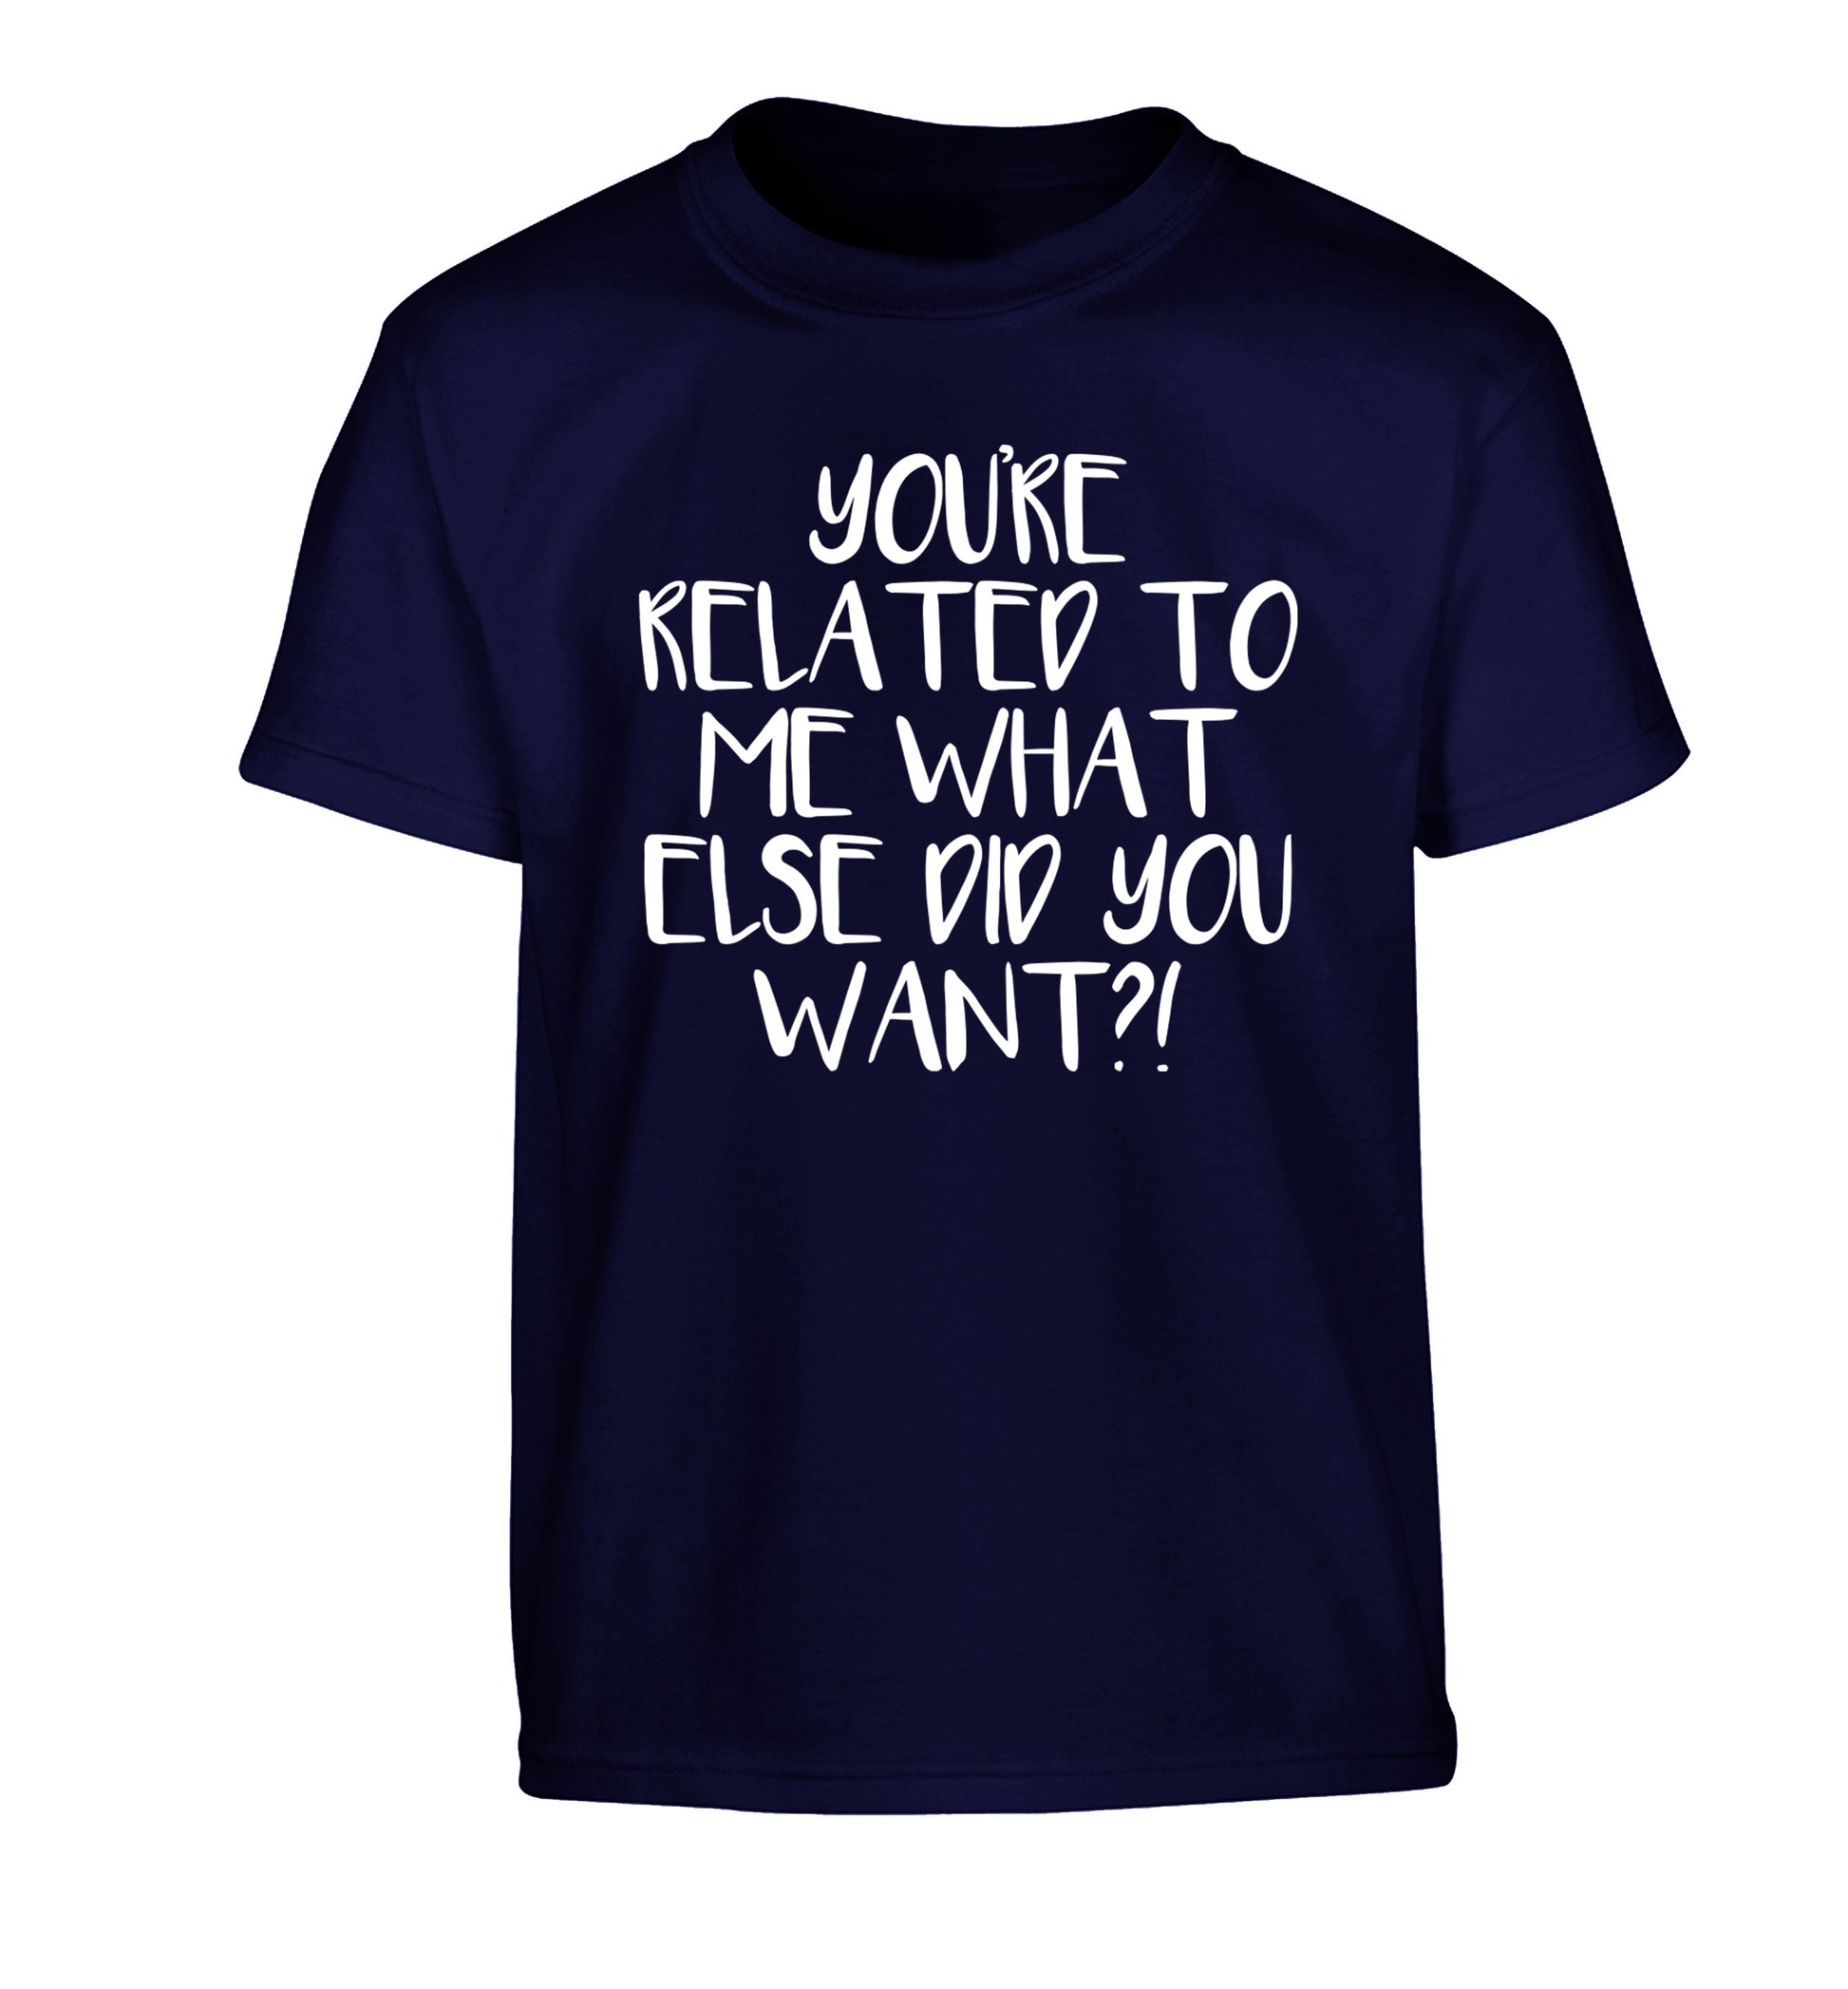 You're related to me what more do you want? Children's navy Tshirt 12-13 Years